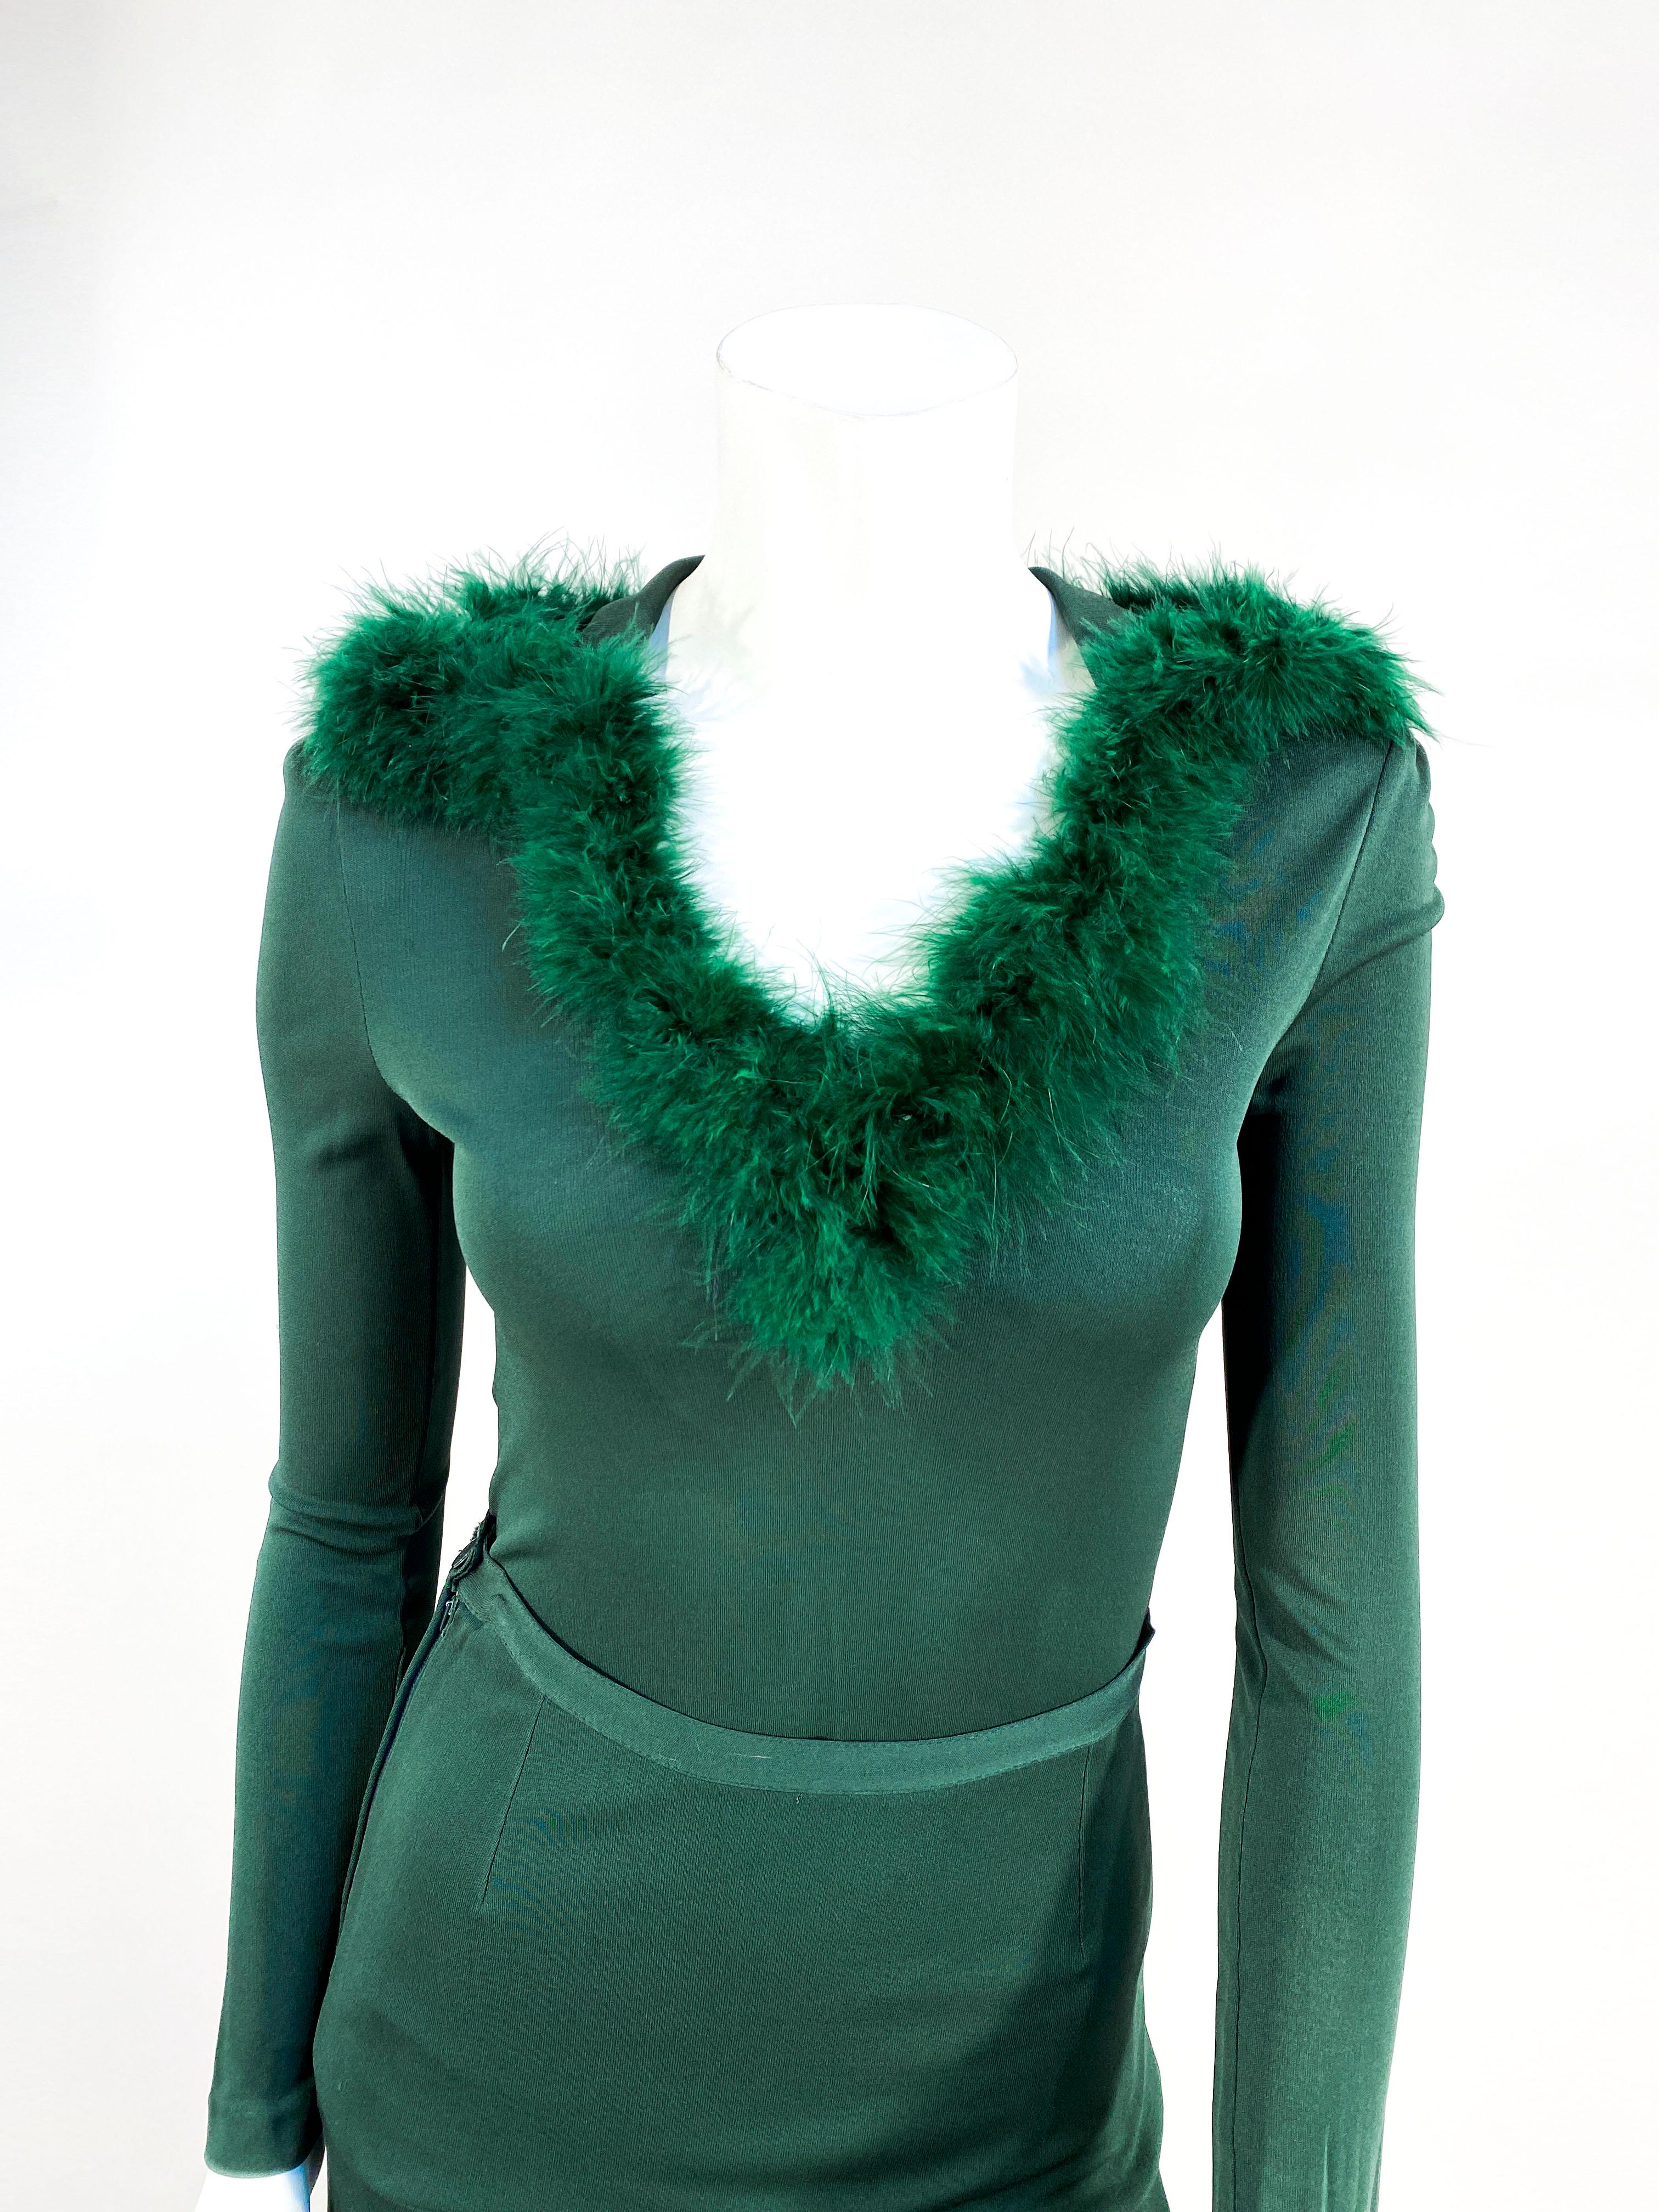 1970s Helga Howie forest green rayon kind two-piece set. The elongated tunic has long tapered sleeves, swan feather trim over na enlarged collar down to a moderately plunging neckline. The skirt has a was it band and is fitted to the hip to where it